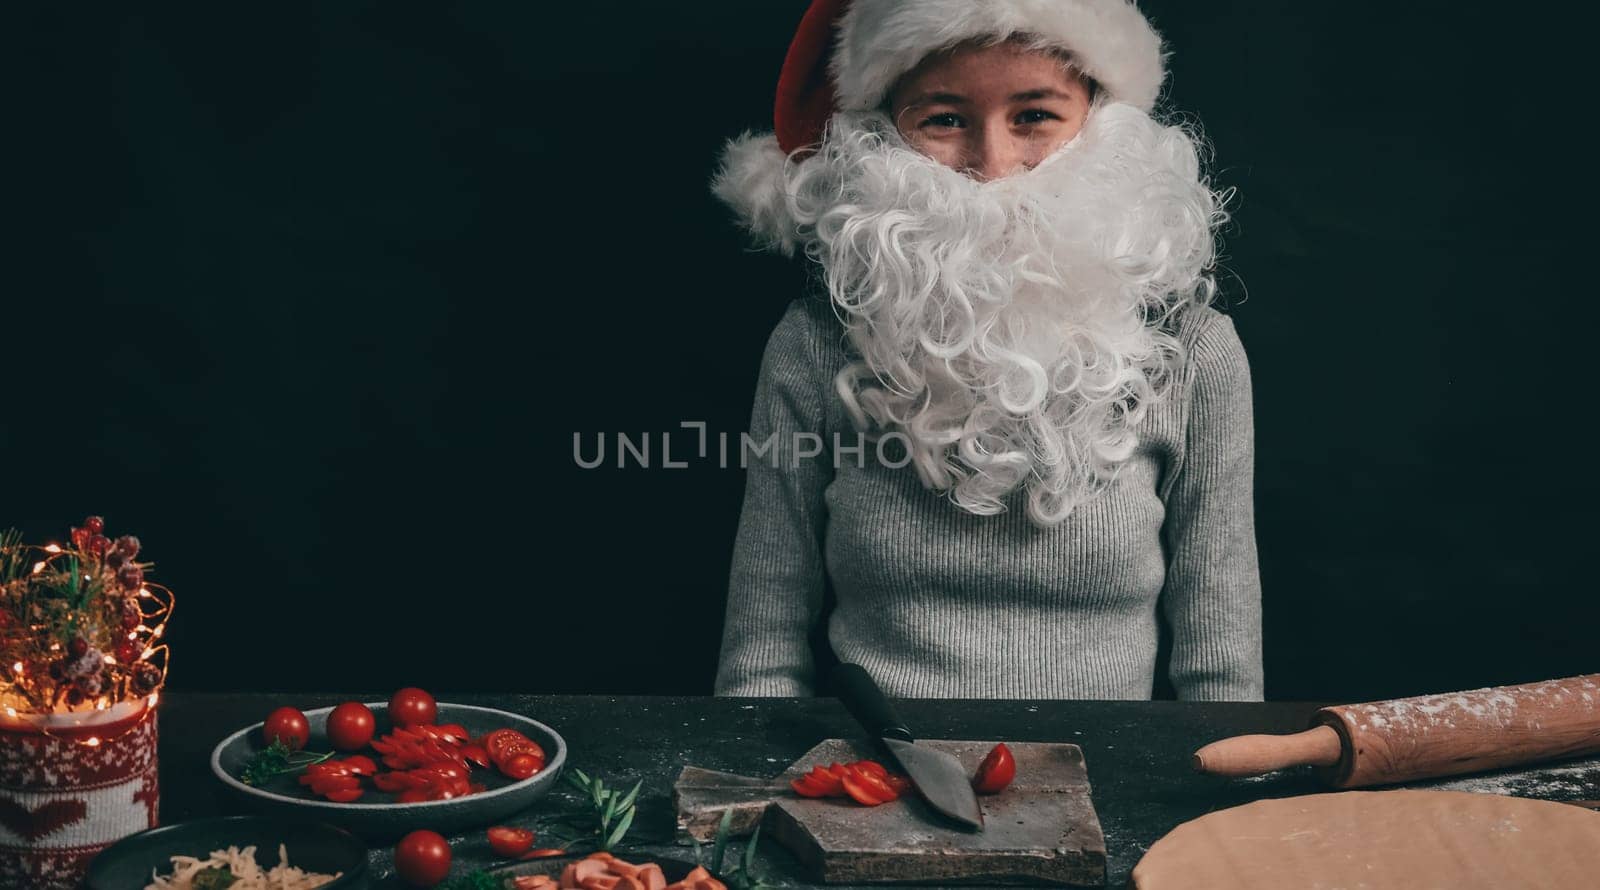 Caucasian teenage girl in a Christmas hat with a beard sits cheerful at the table with cherry tomatoes on a gray wooden board, next to pizza dough, rolling pin and Christmas decor on a dark background, close-up side view. Cooking concept.